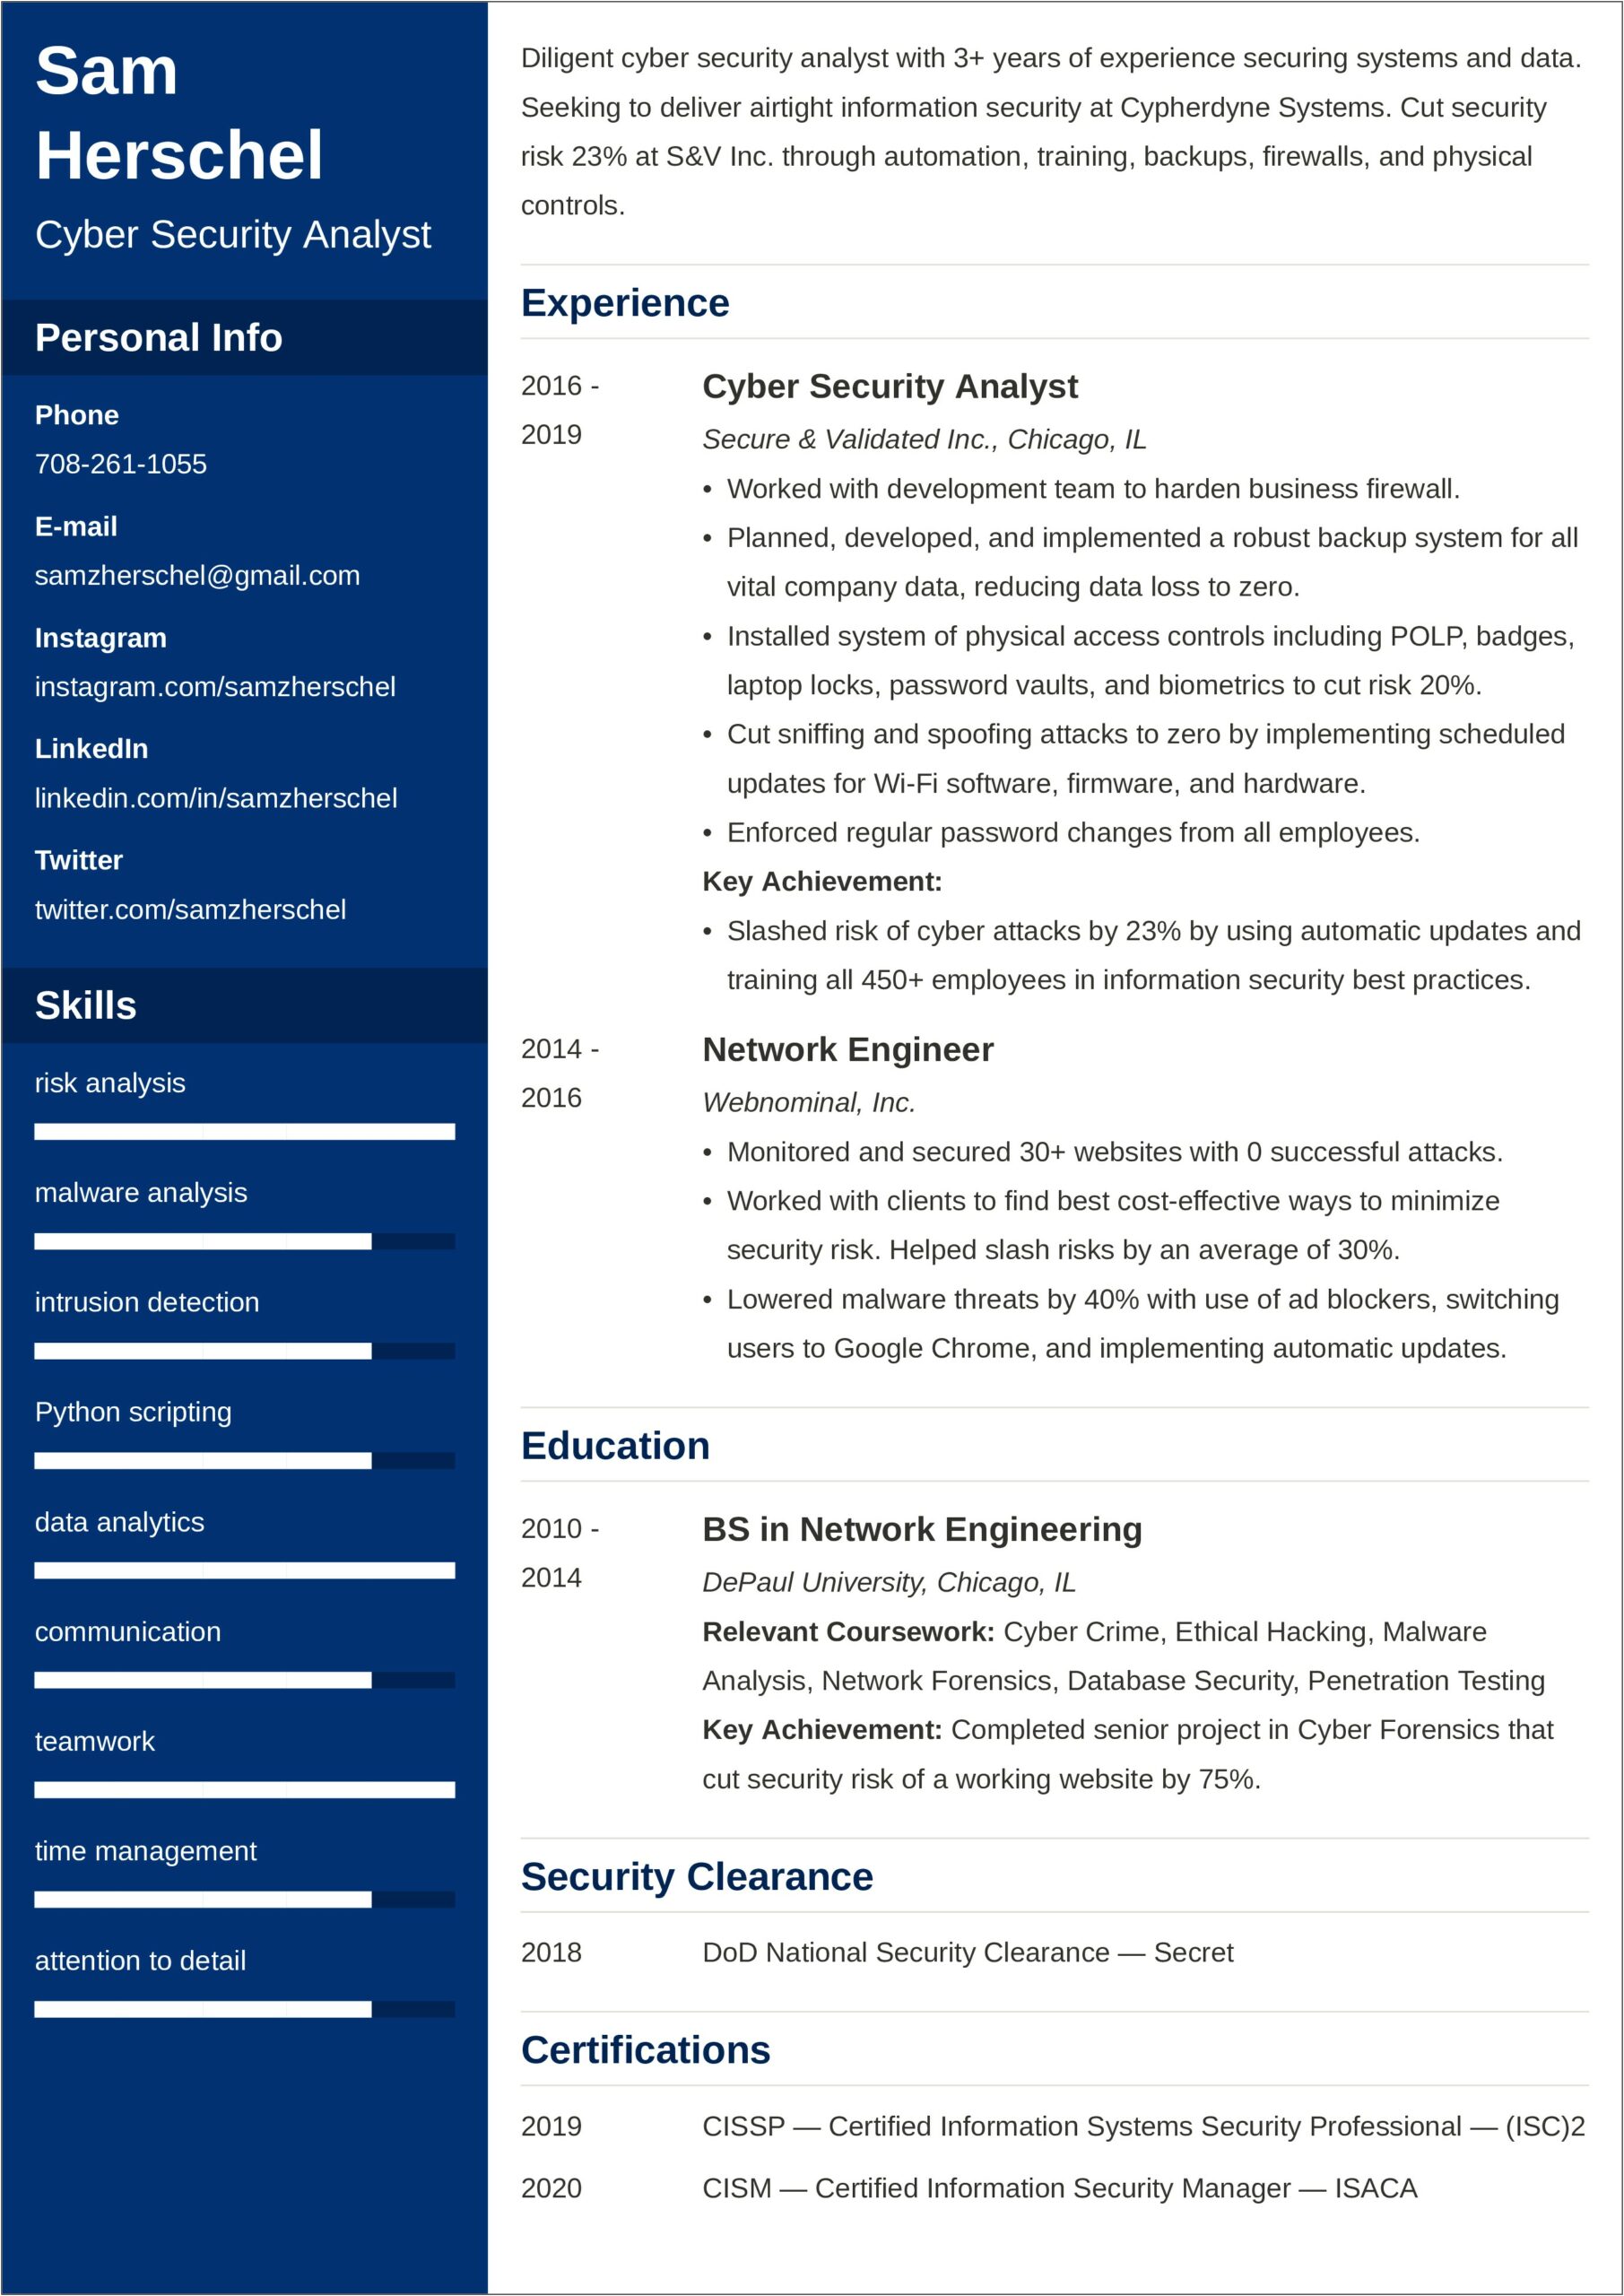 Security+ Certification Summary Of Qualifications Resume